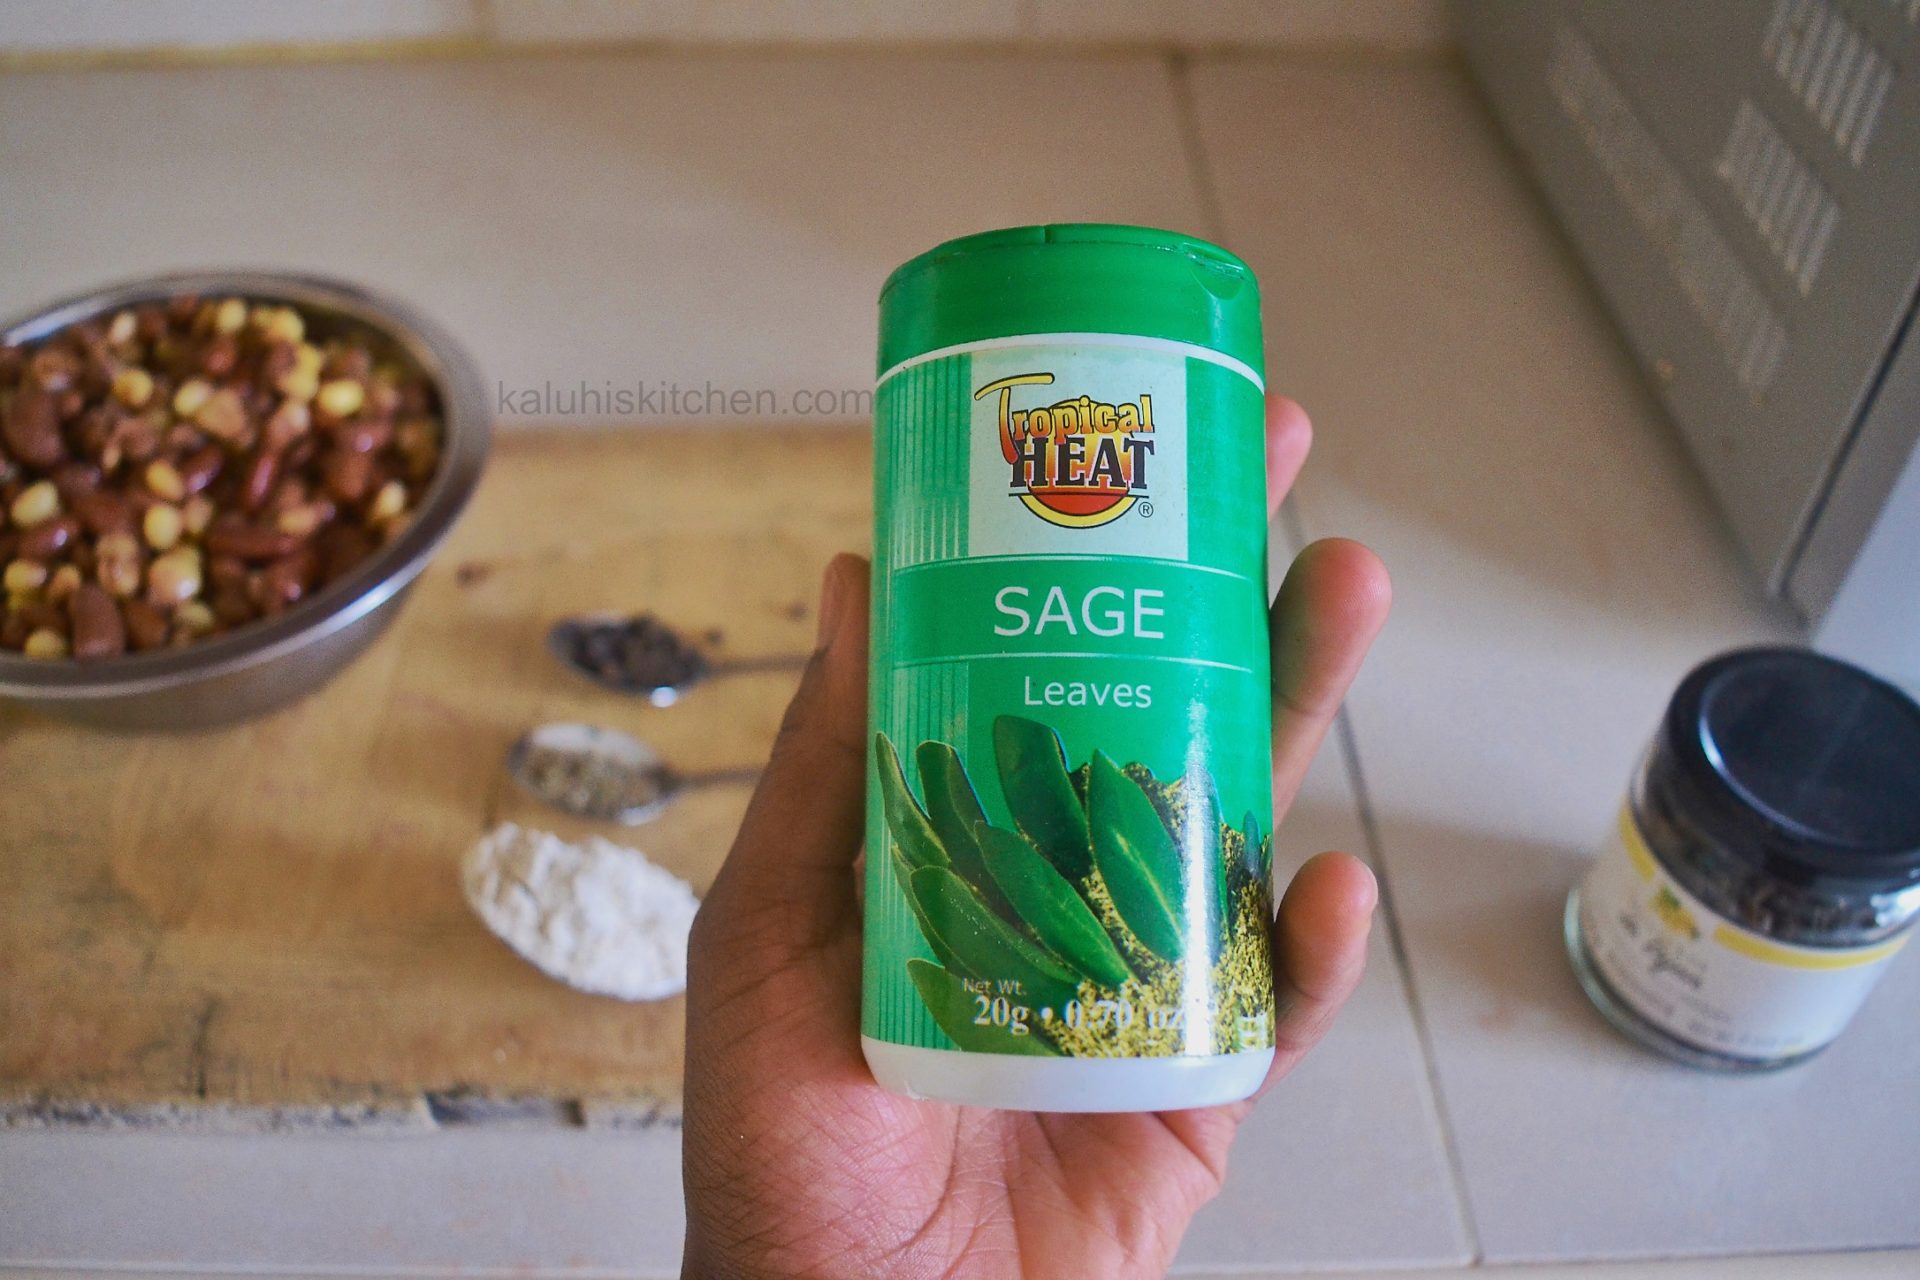 sage is an excellent herb whether dried or fresh that adds beautiful flavor to food including githeri_sage and garlic githeri_kaluhiskitchen.com